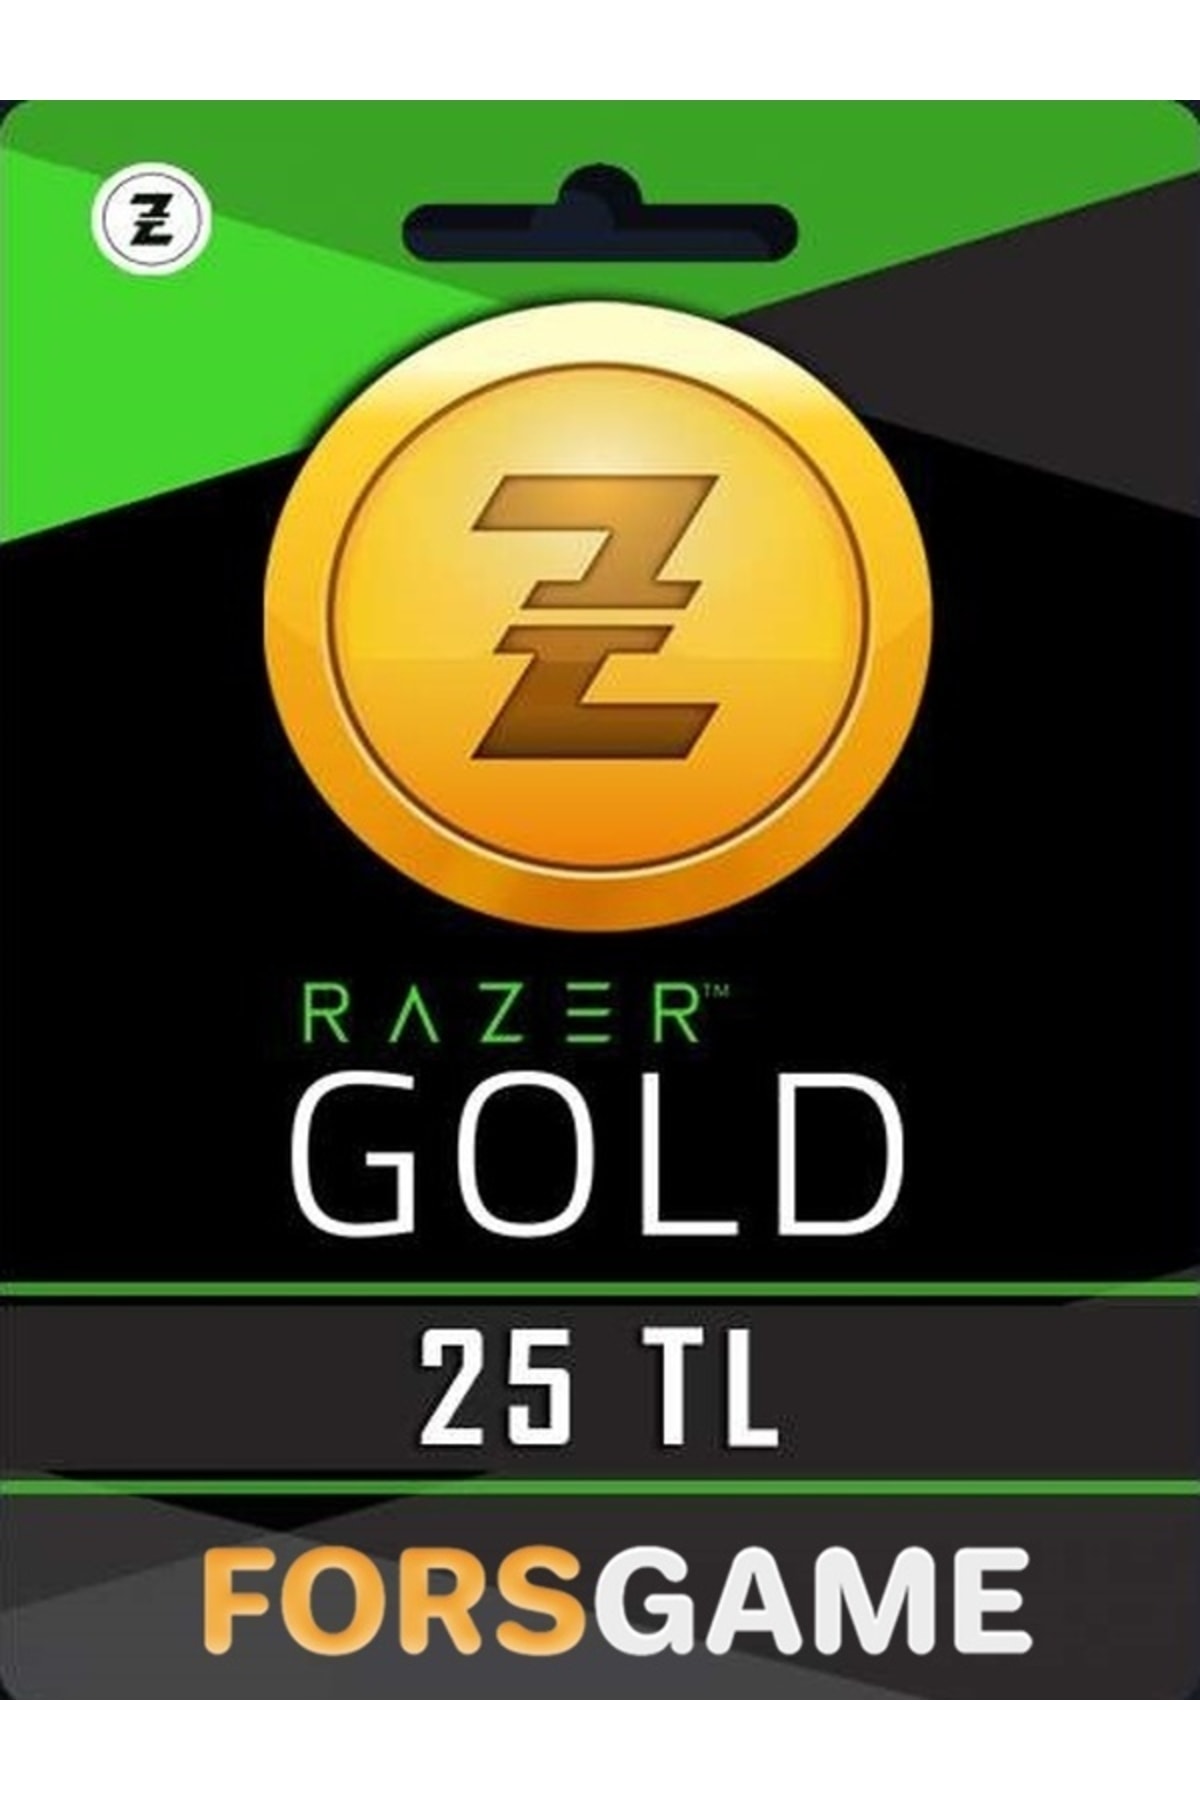 fors game Razer Gold Pin 25 Tl